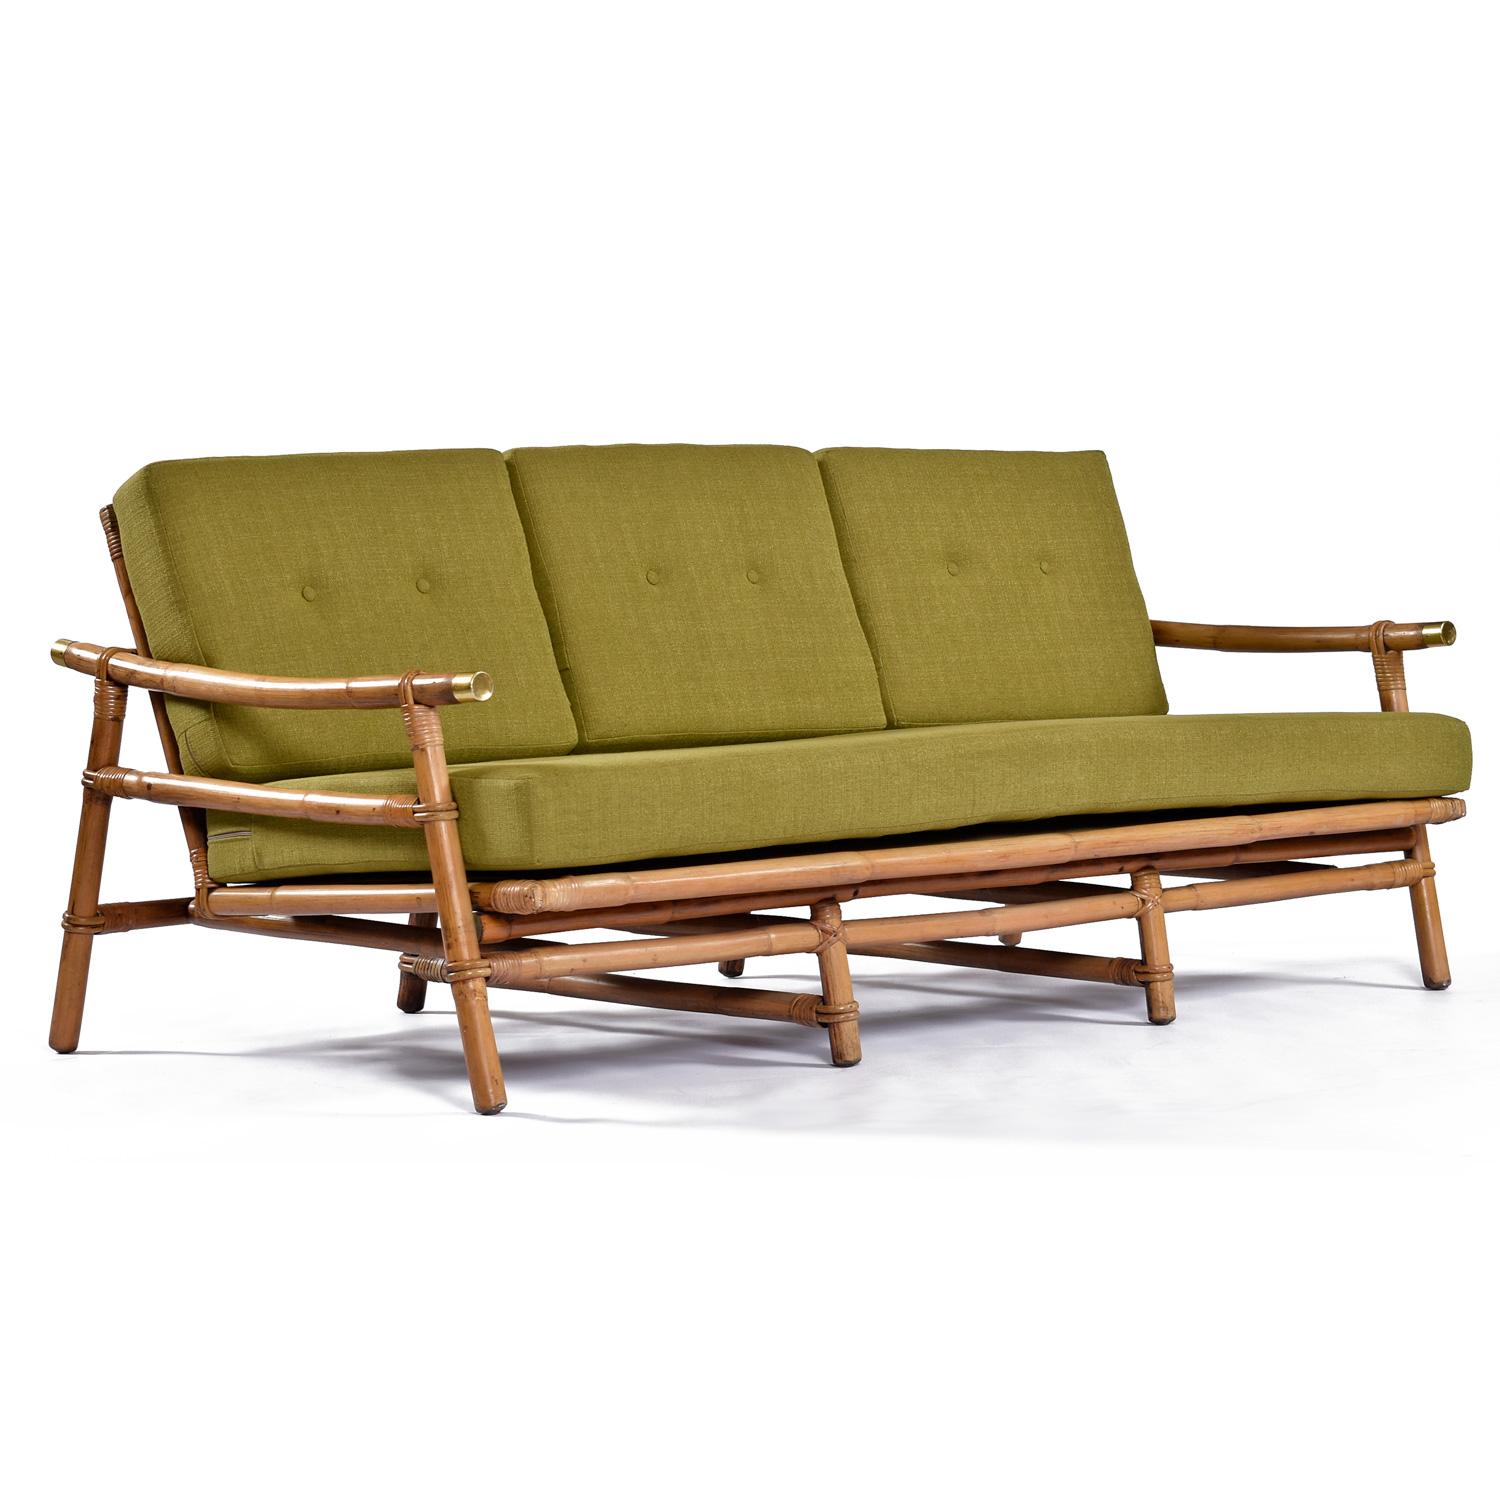 bamboo couch